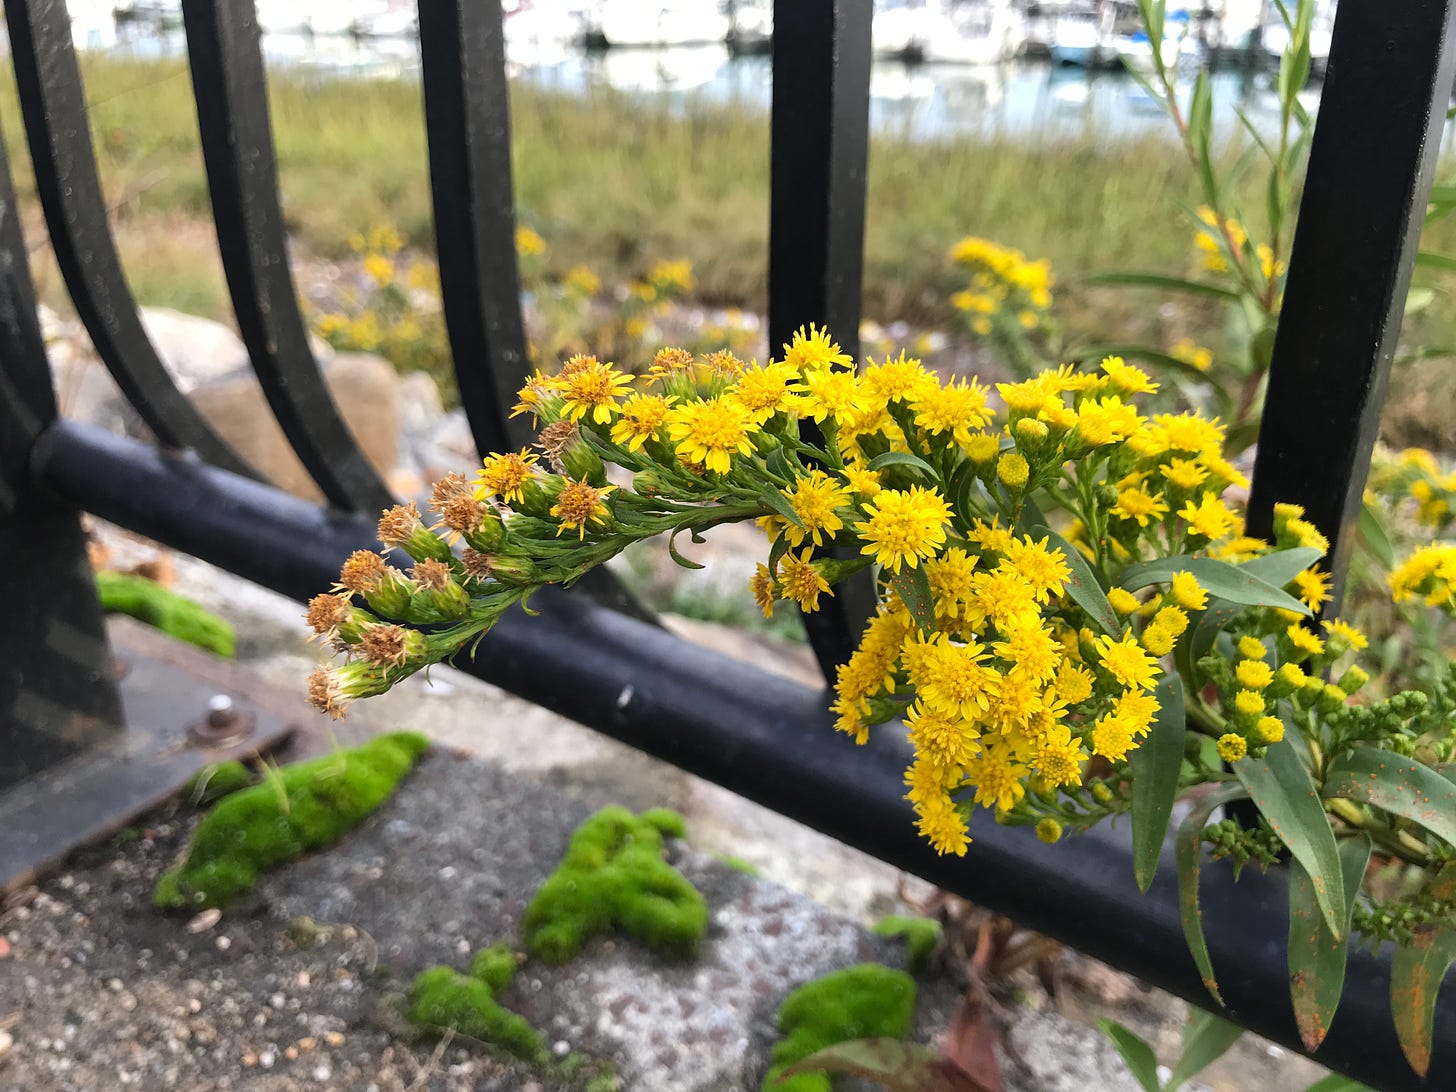 Goldenrod blooming on a city promenade